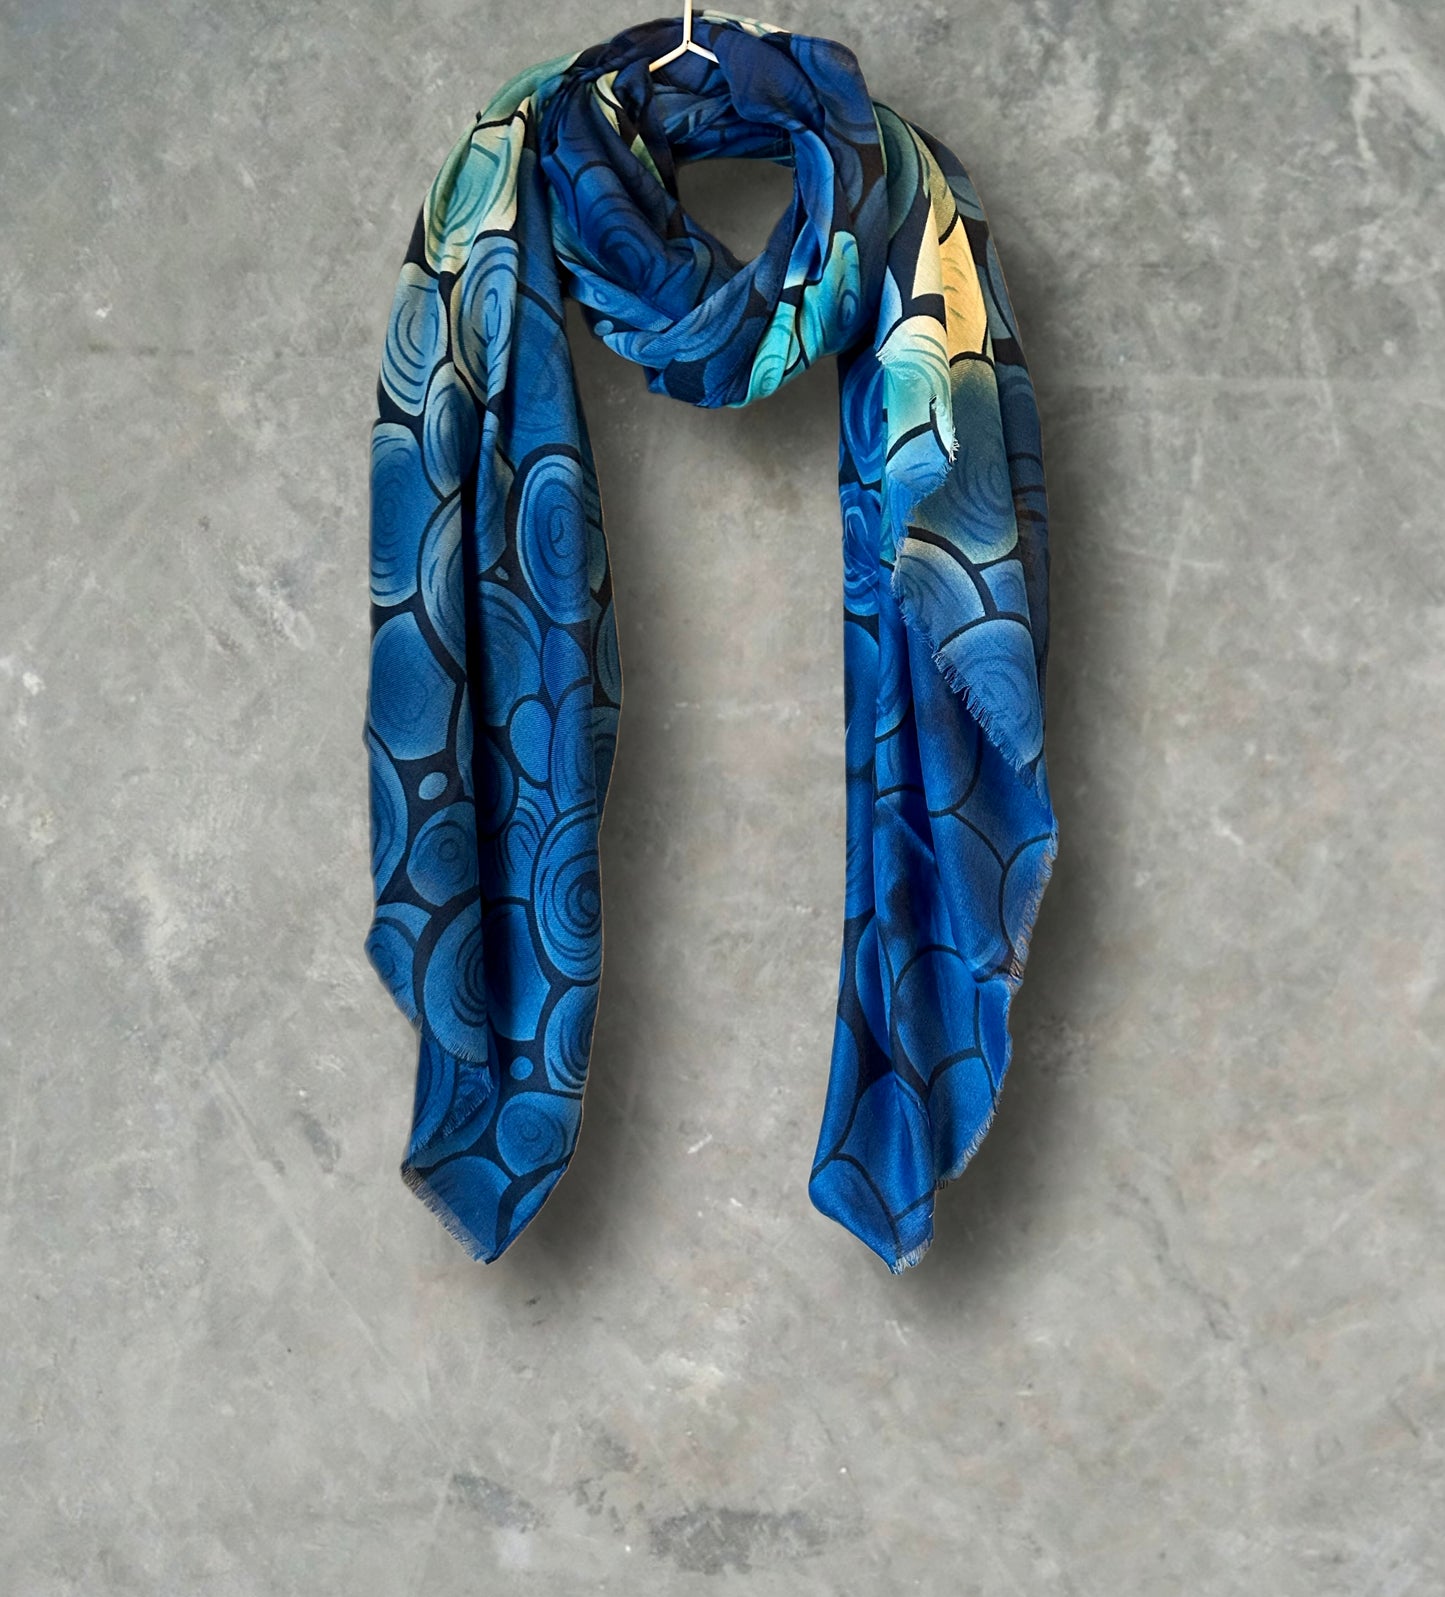 Seamless Bubbles Pattern Cotton Scarf in Blue. Women's Scarf for Autumn and Winter,Ideal for Gifting to Her or Mom on Birthdays or Christma.